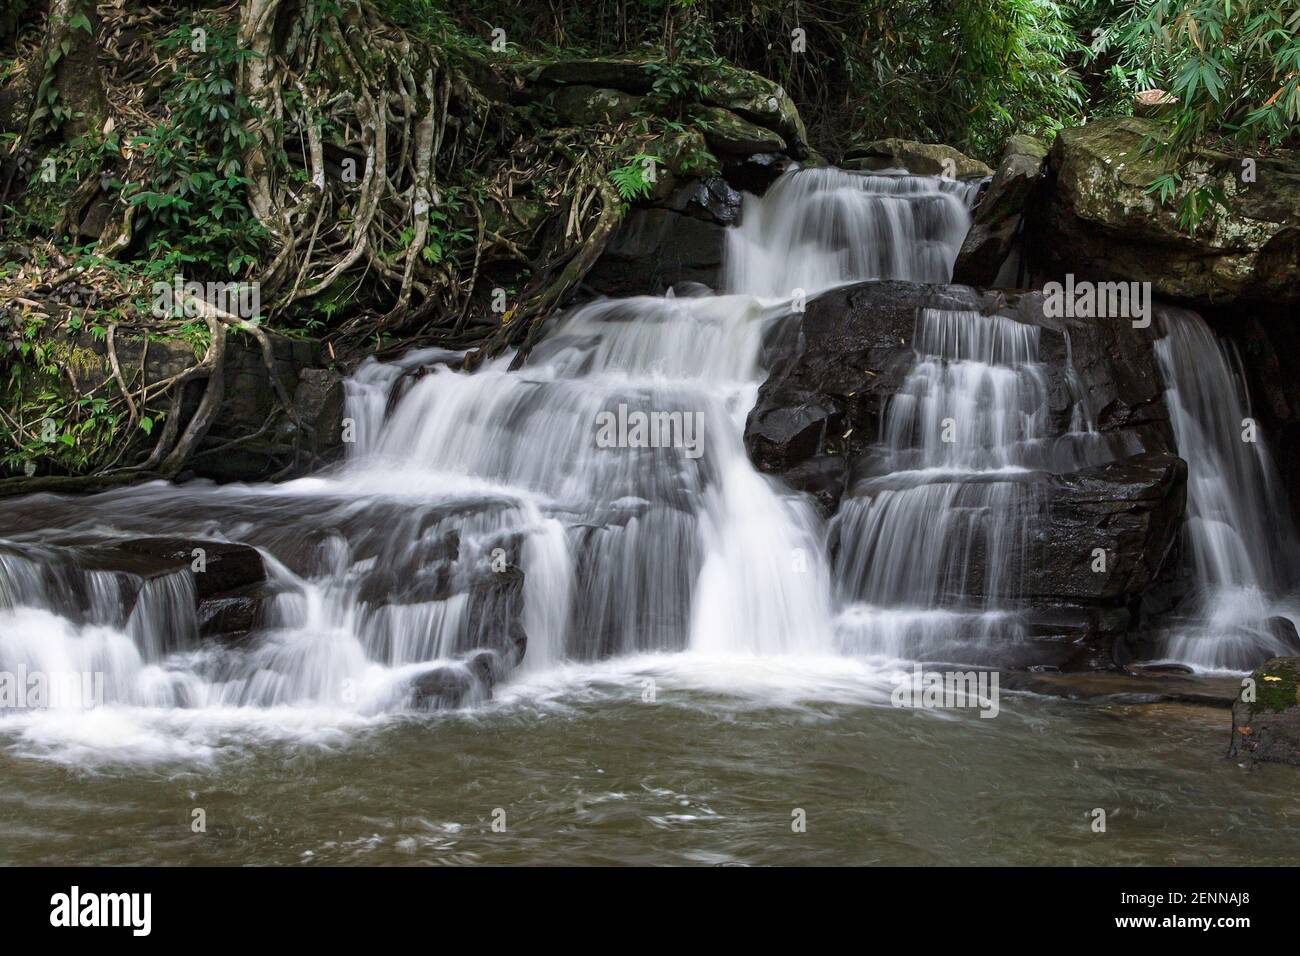 Small Waterfall in the Mae Puai River, Doi Inthanon National Park, Thailand. Stock Photo